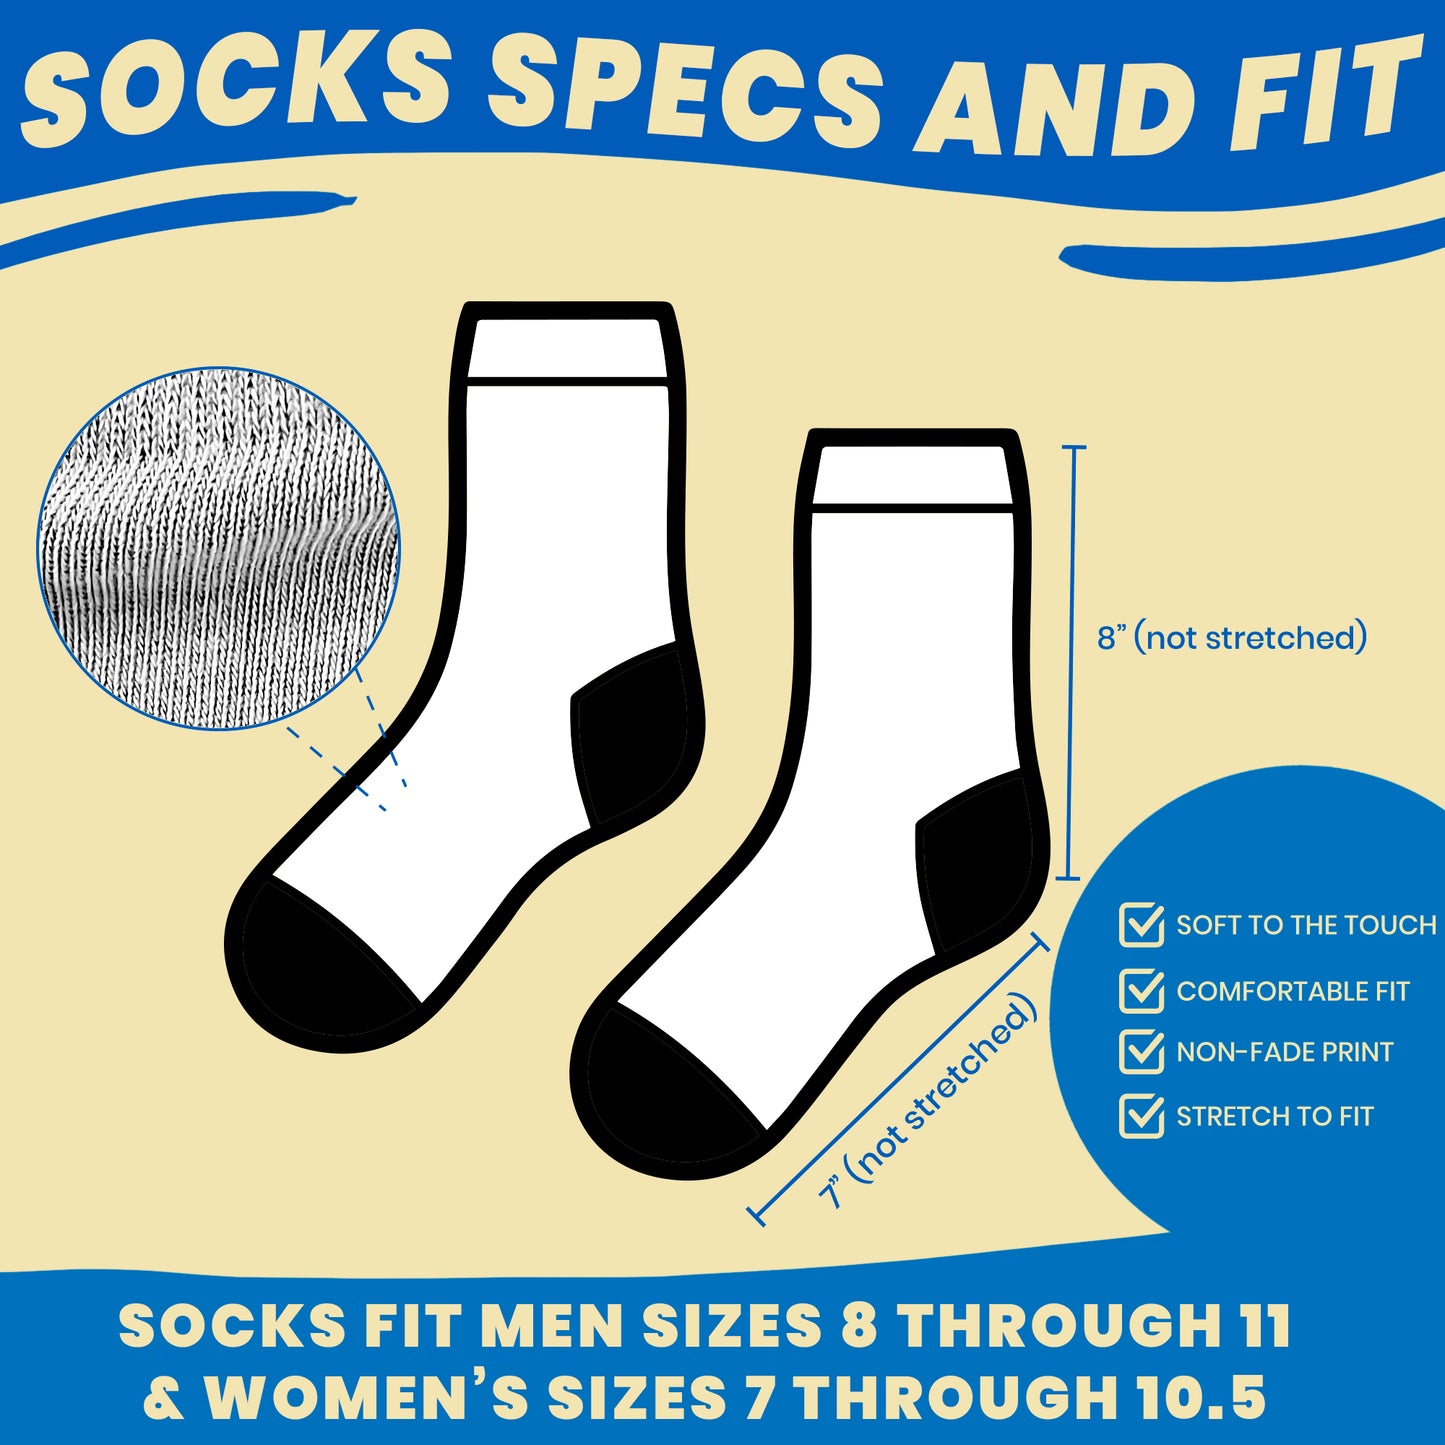 personalized volleyball socks showing specs of socks